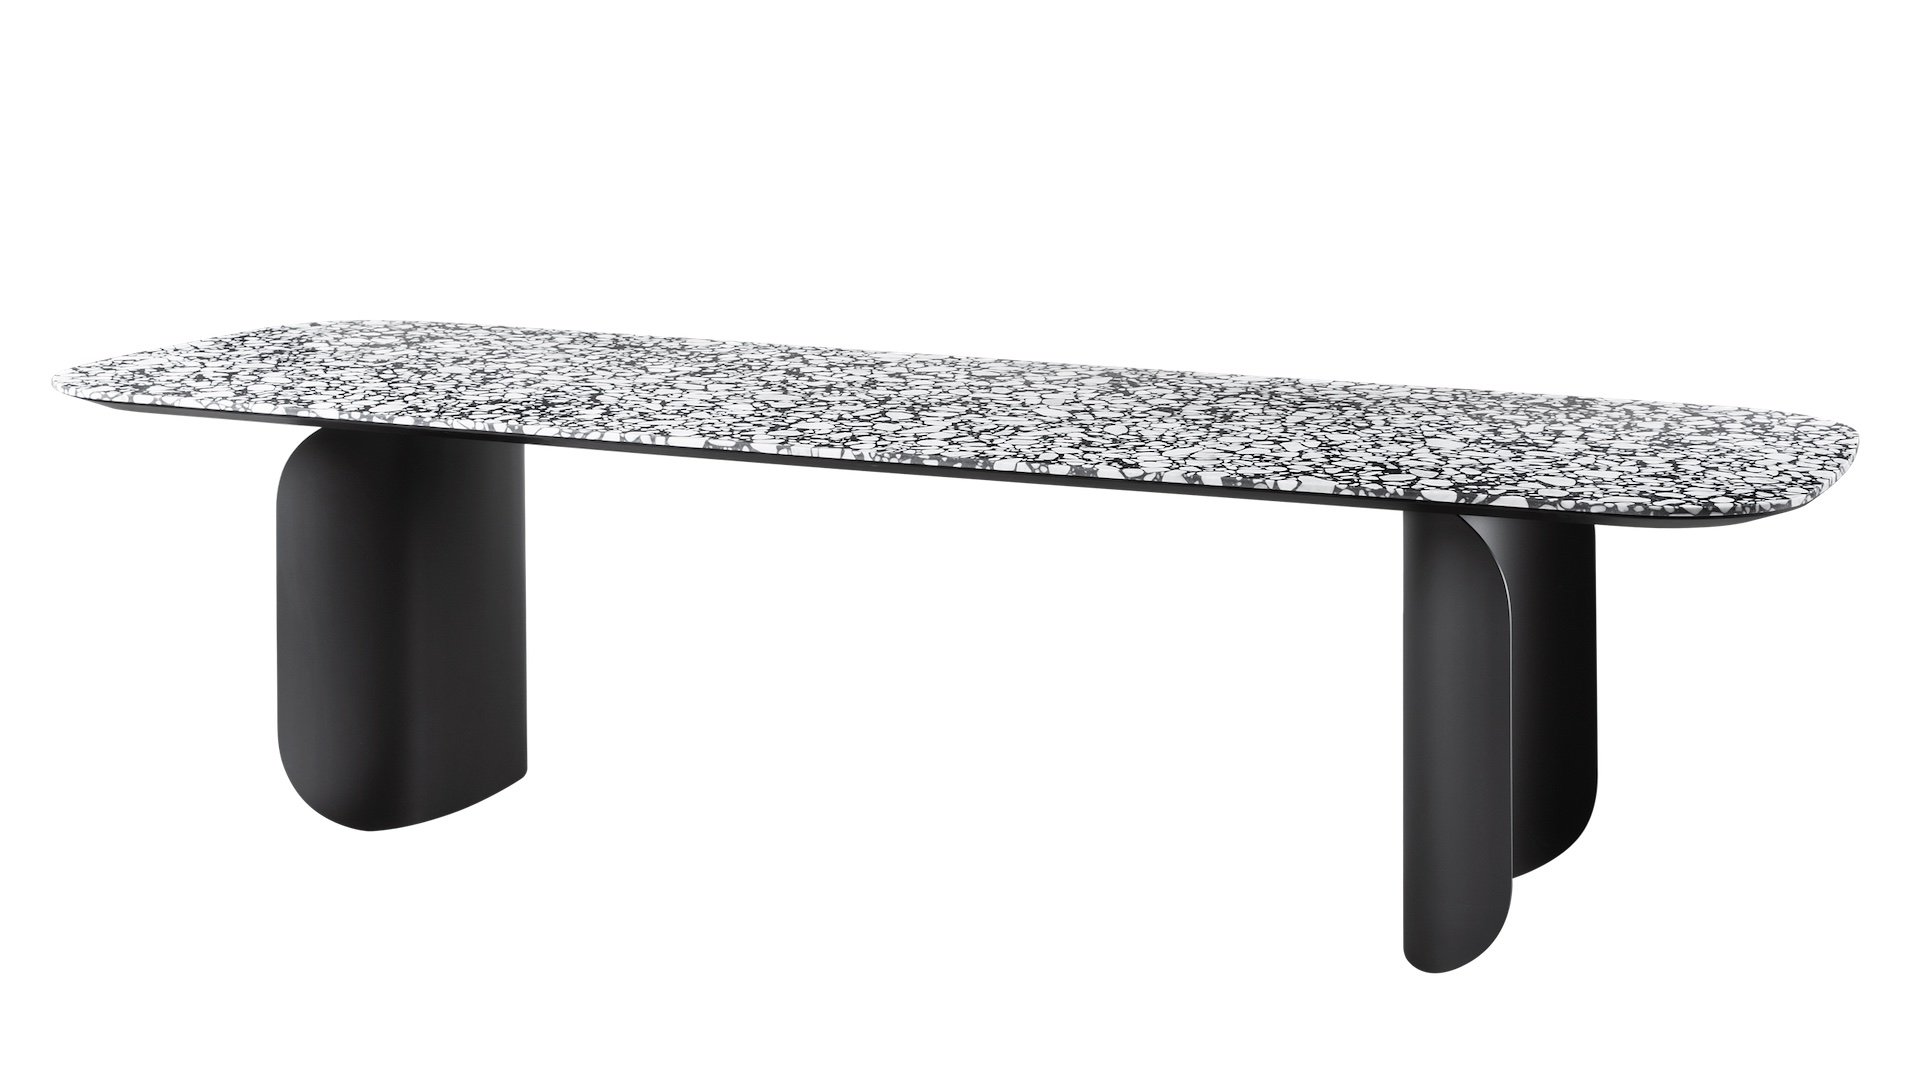 Barry Dining Table from Miniforms, designed by Alain Gilles